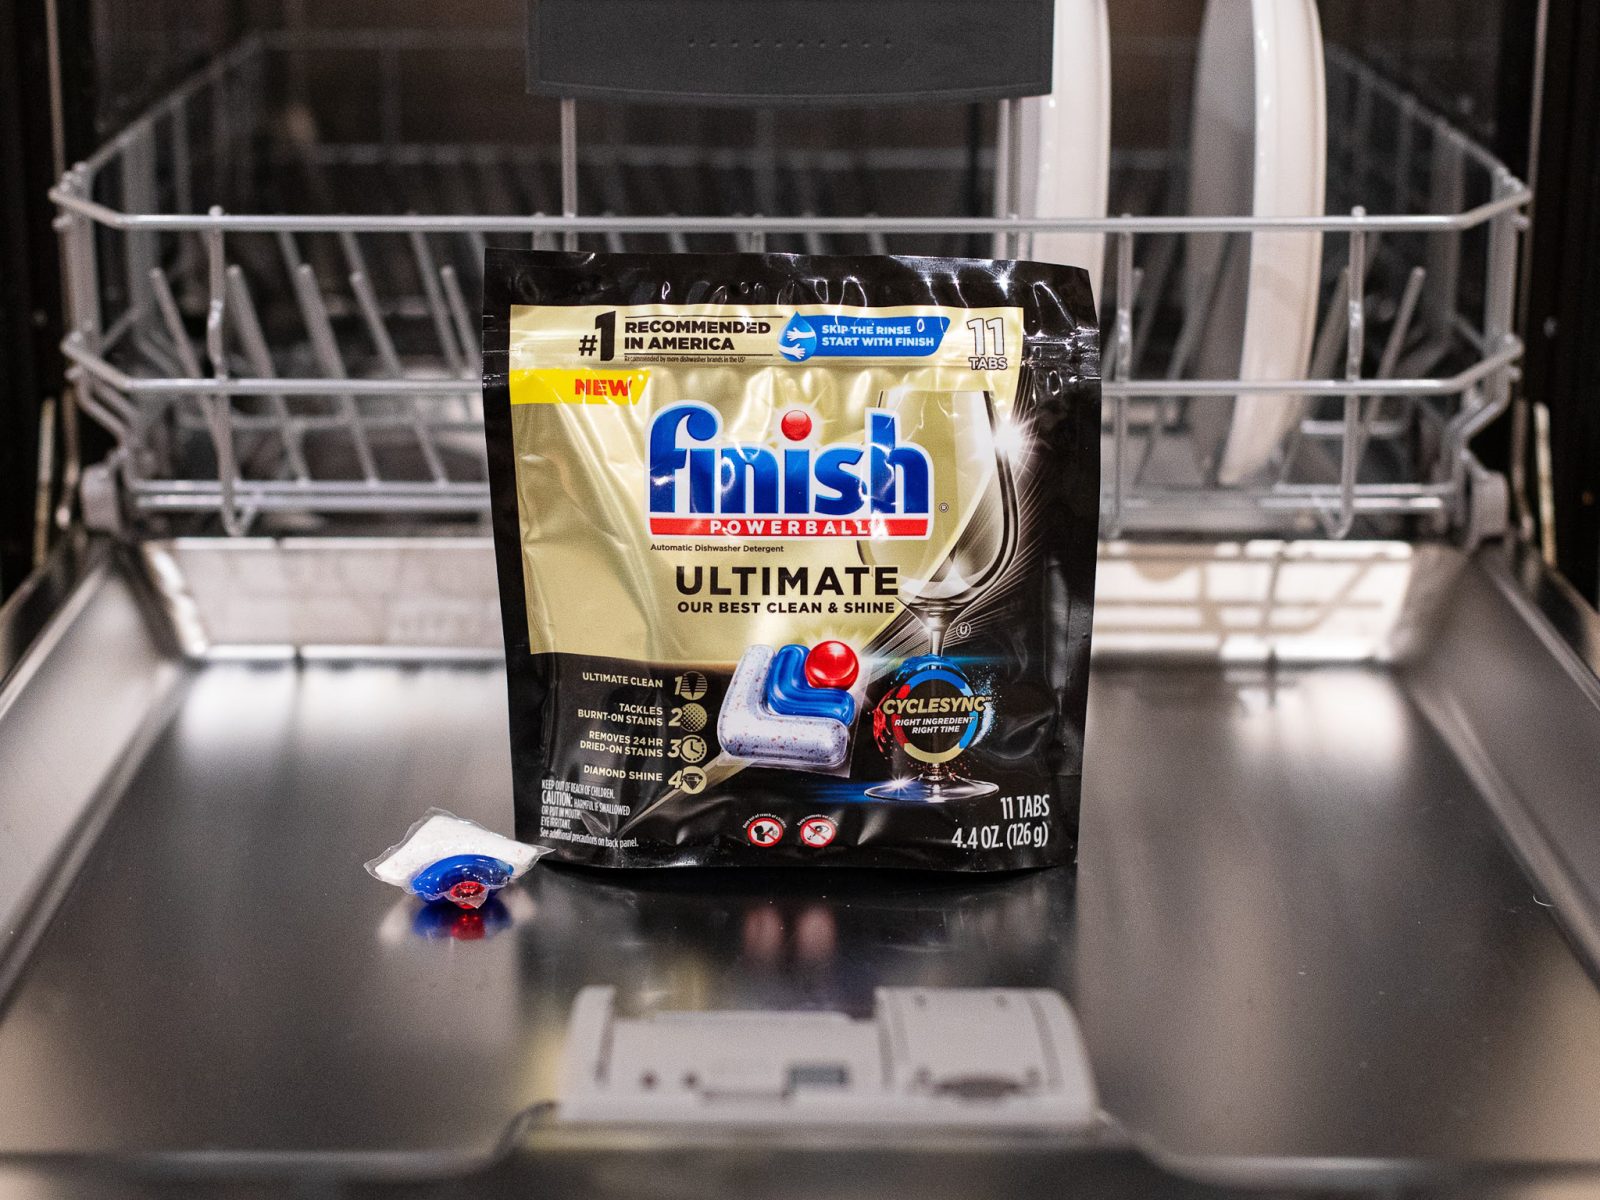 Finish Detergent As Low As $1.99 At Kroger (Regular Price $6.29) – Plus Cheap Jet-Dry And Dishwasher Cleaner